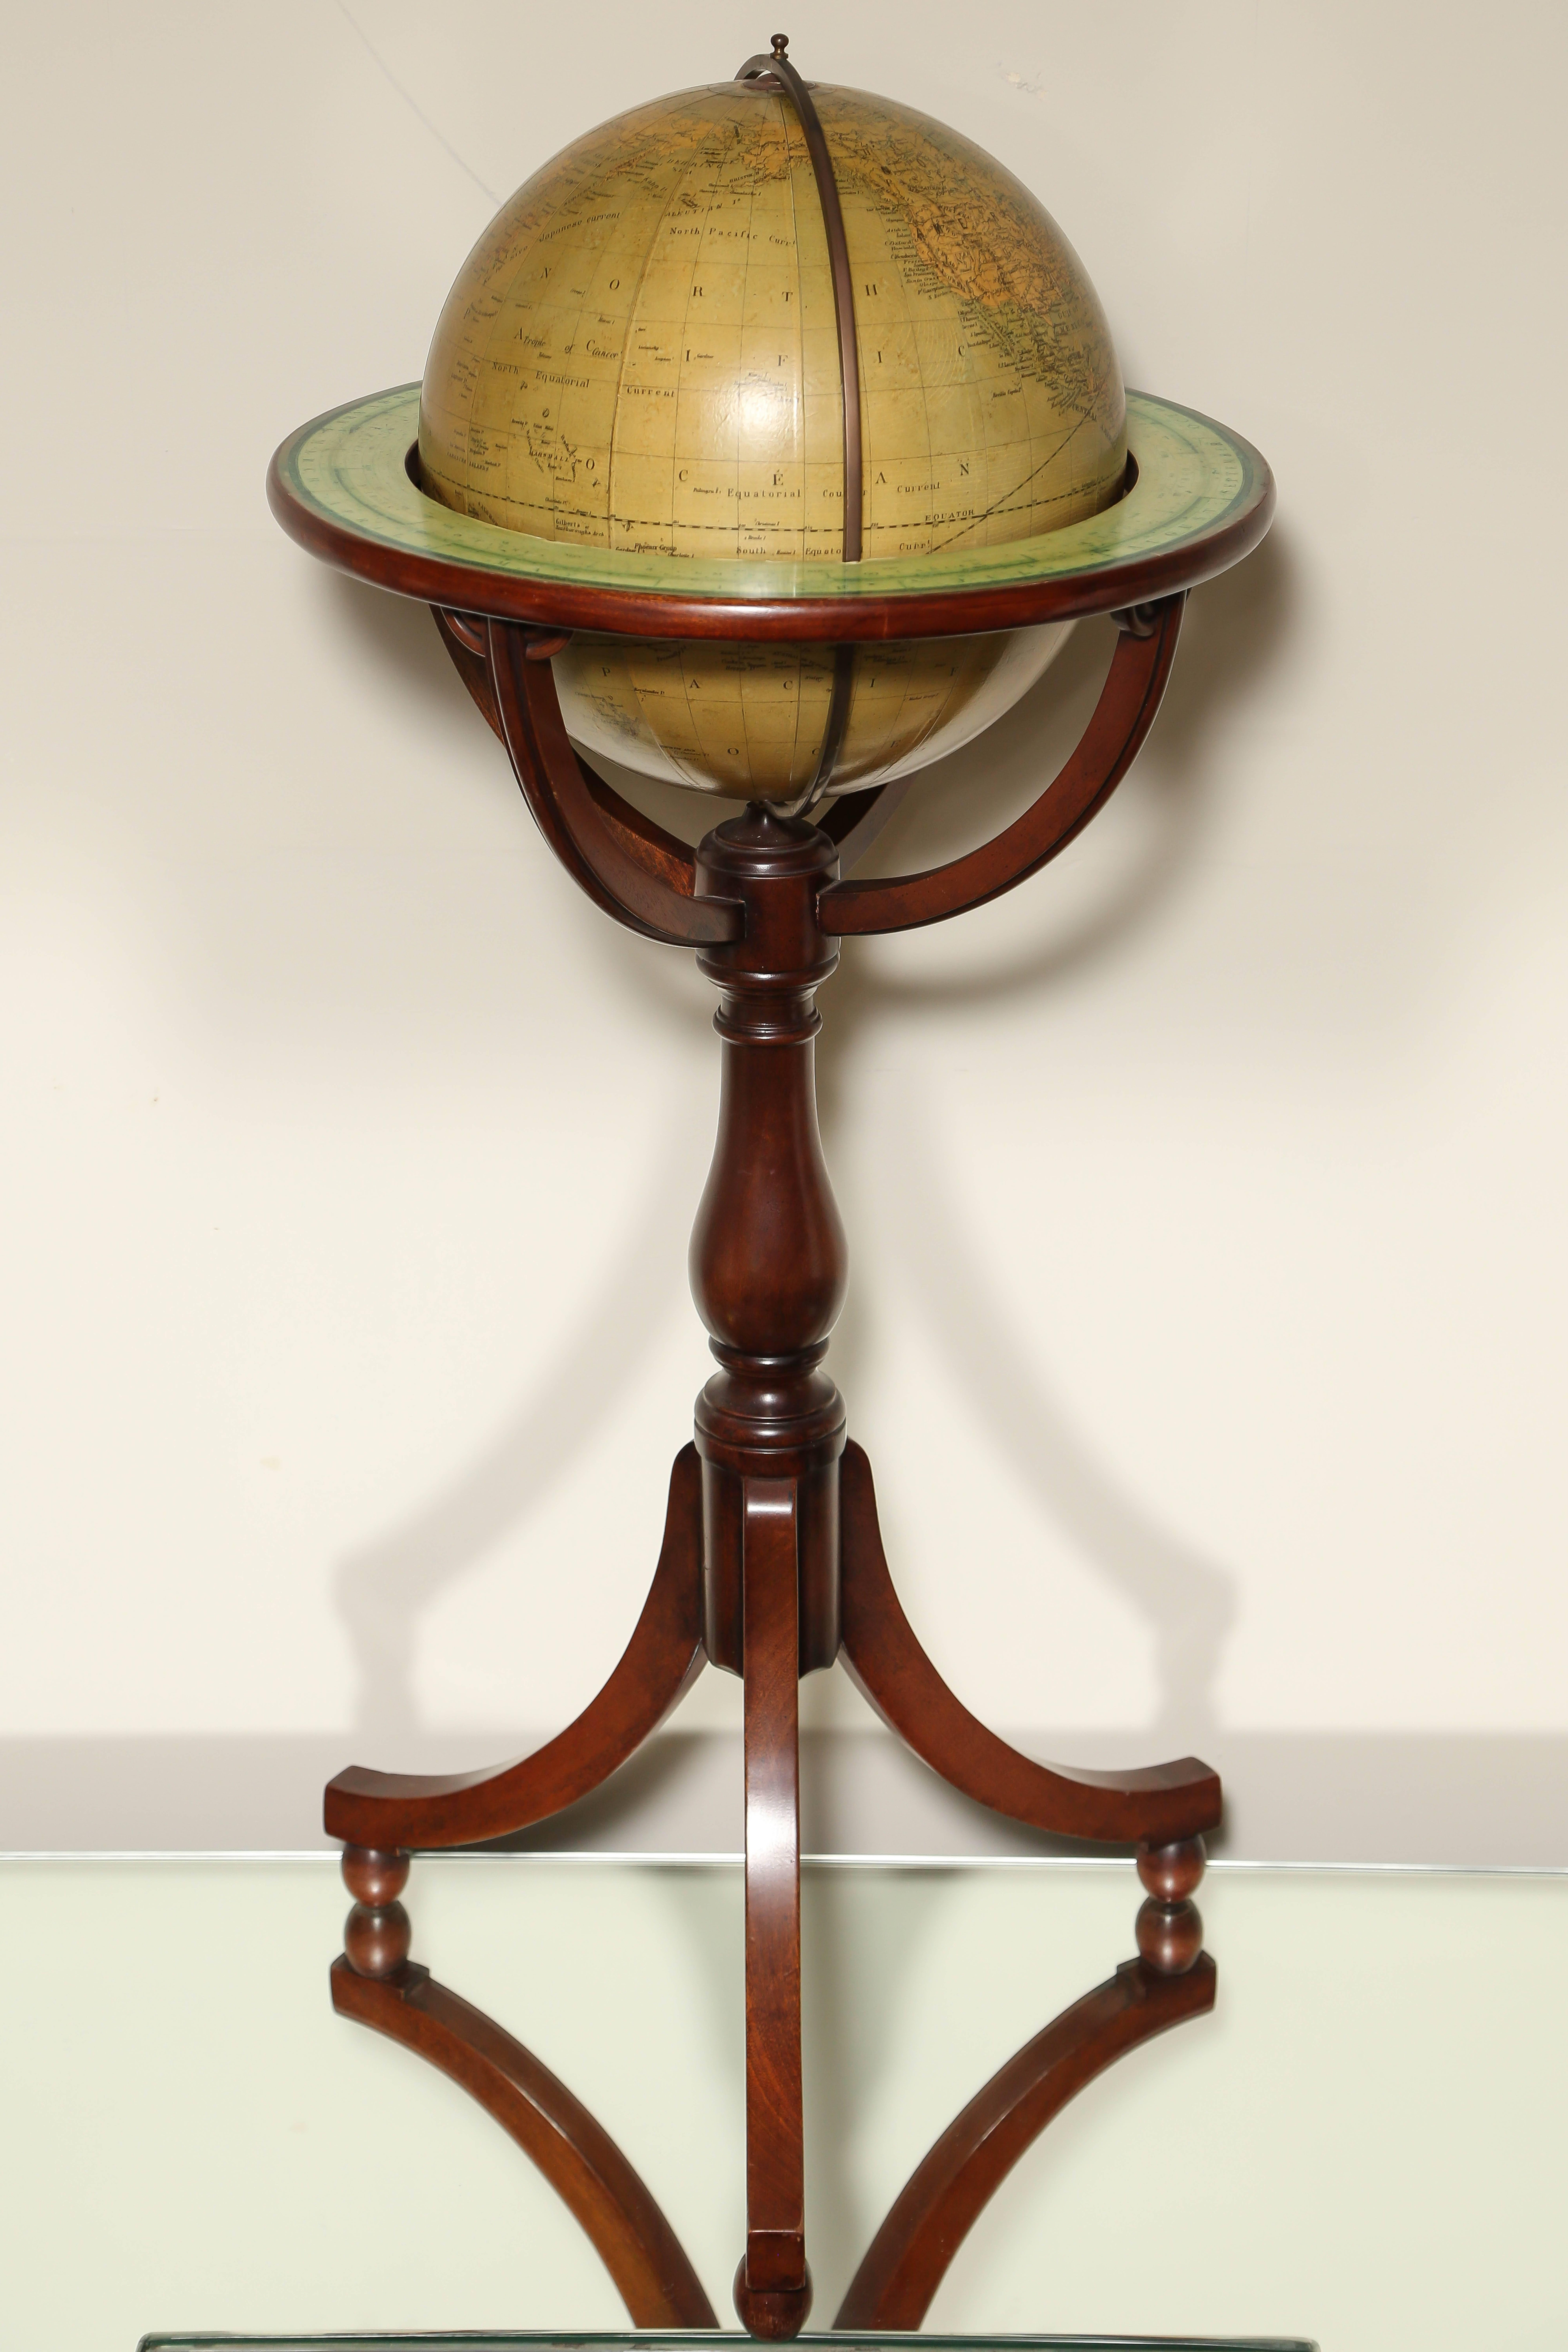 Geographical Institute of Brussels after the original dated 1881 and mounted on fine mahogany stand (Globe is 12" diameter).